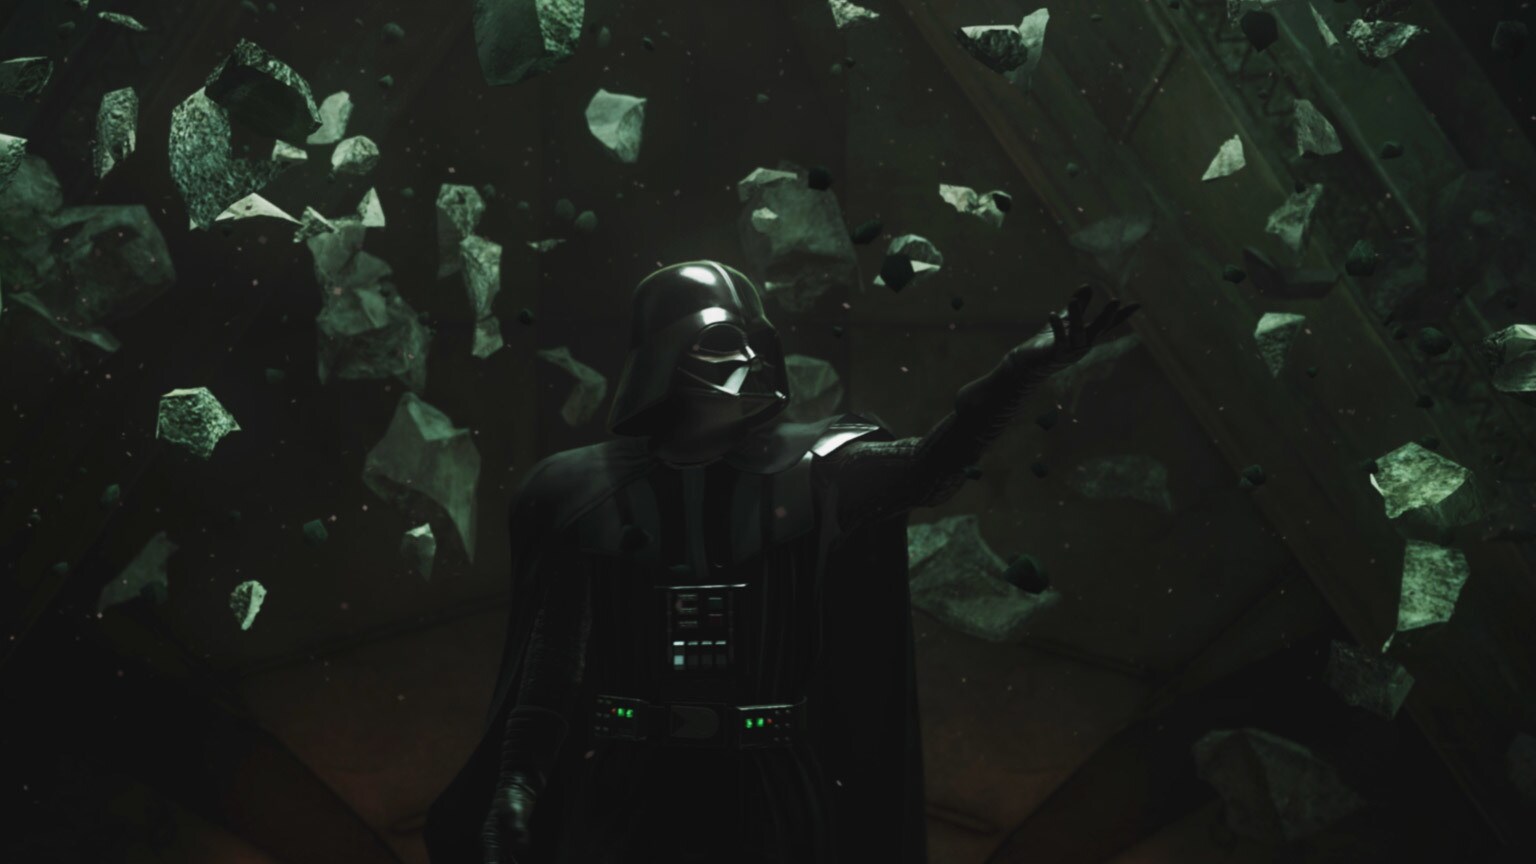 Master the Force with Darth Vader in Vader Immortal – Episode II, Available Now